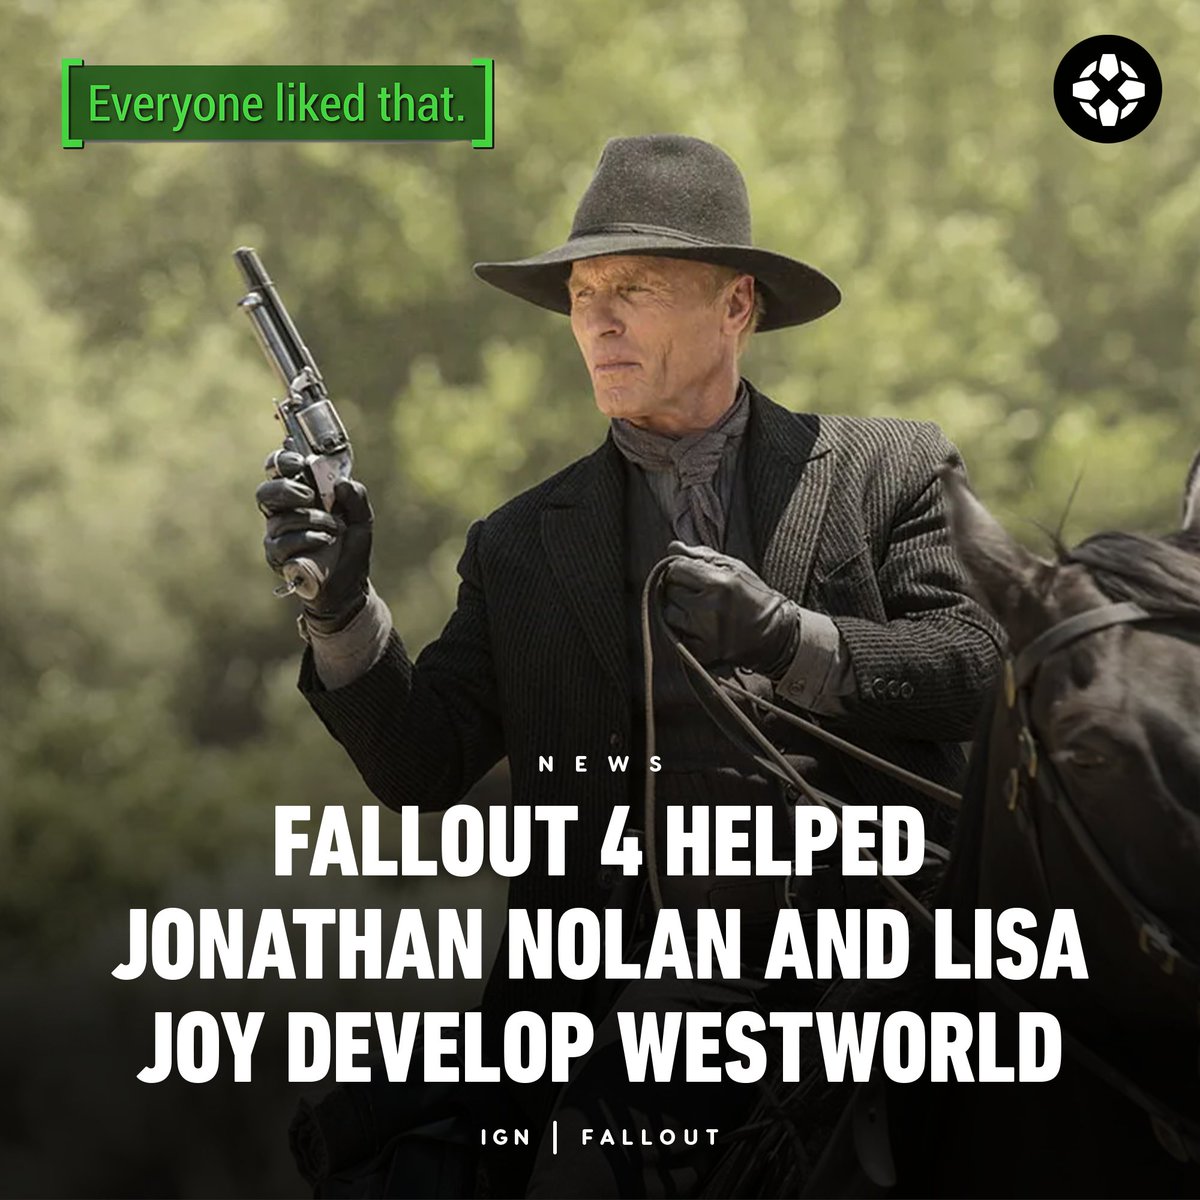 In a recent interview, Jonathan Nolan says that he and Lisa Joy played Fallout 4 while working on Westworld to better understand gaming rules and mechanics, and joked the time spent with the game has now 'turned out for the best' with the Amazon series. bit.ly/3W83eW5